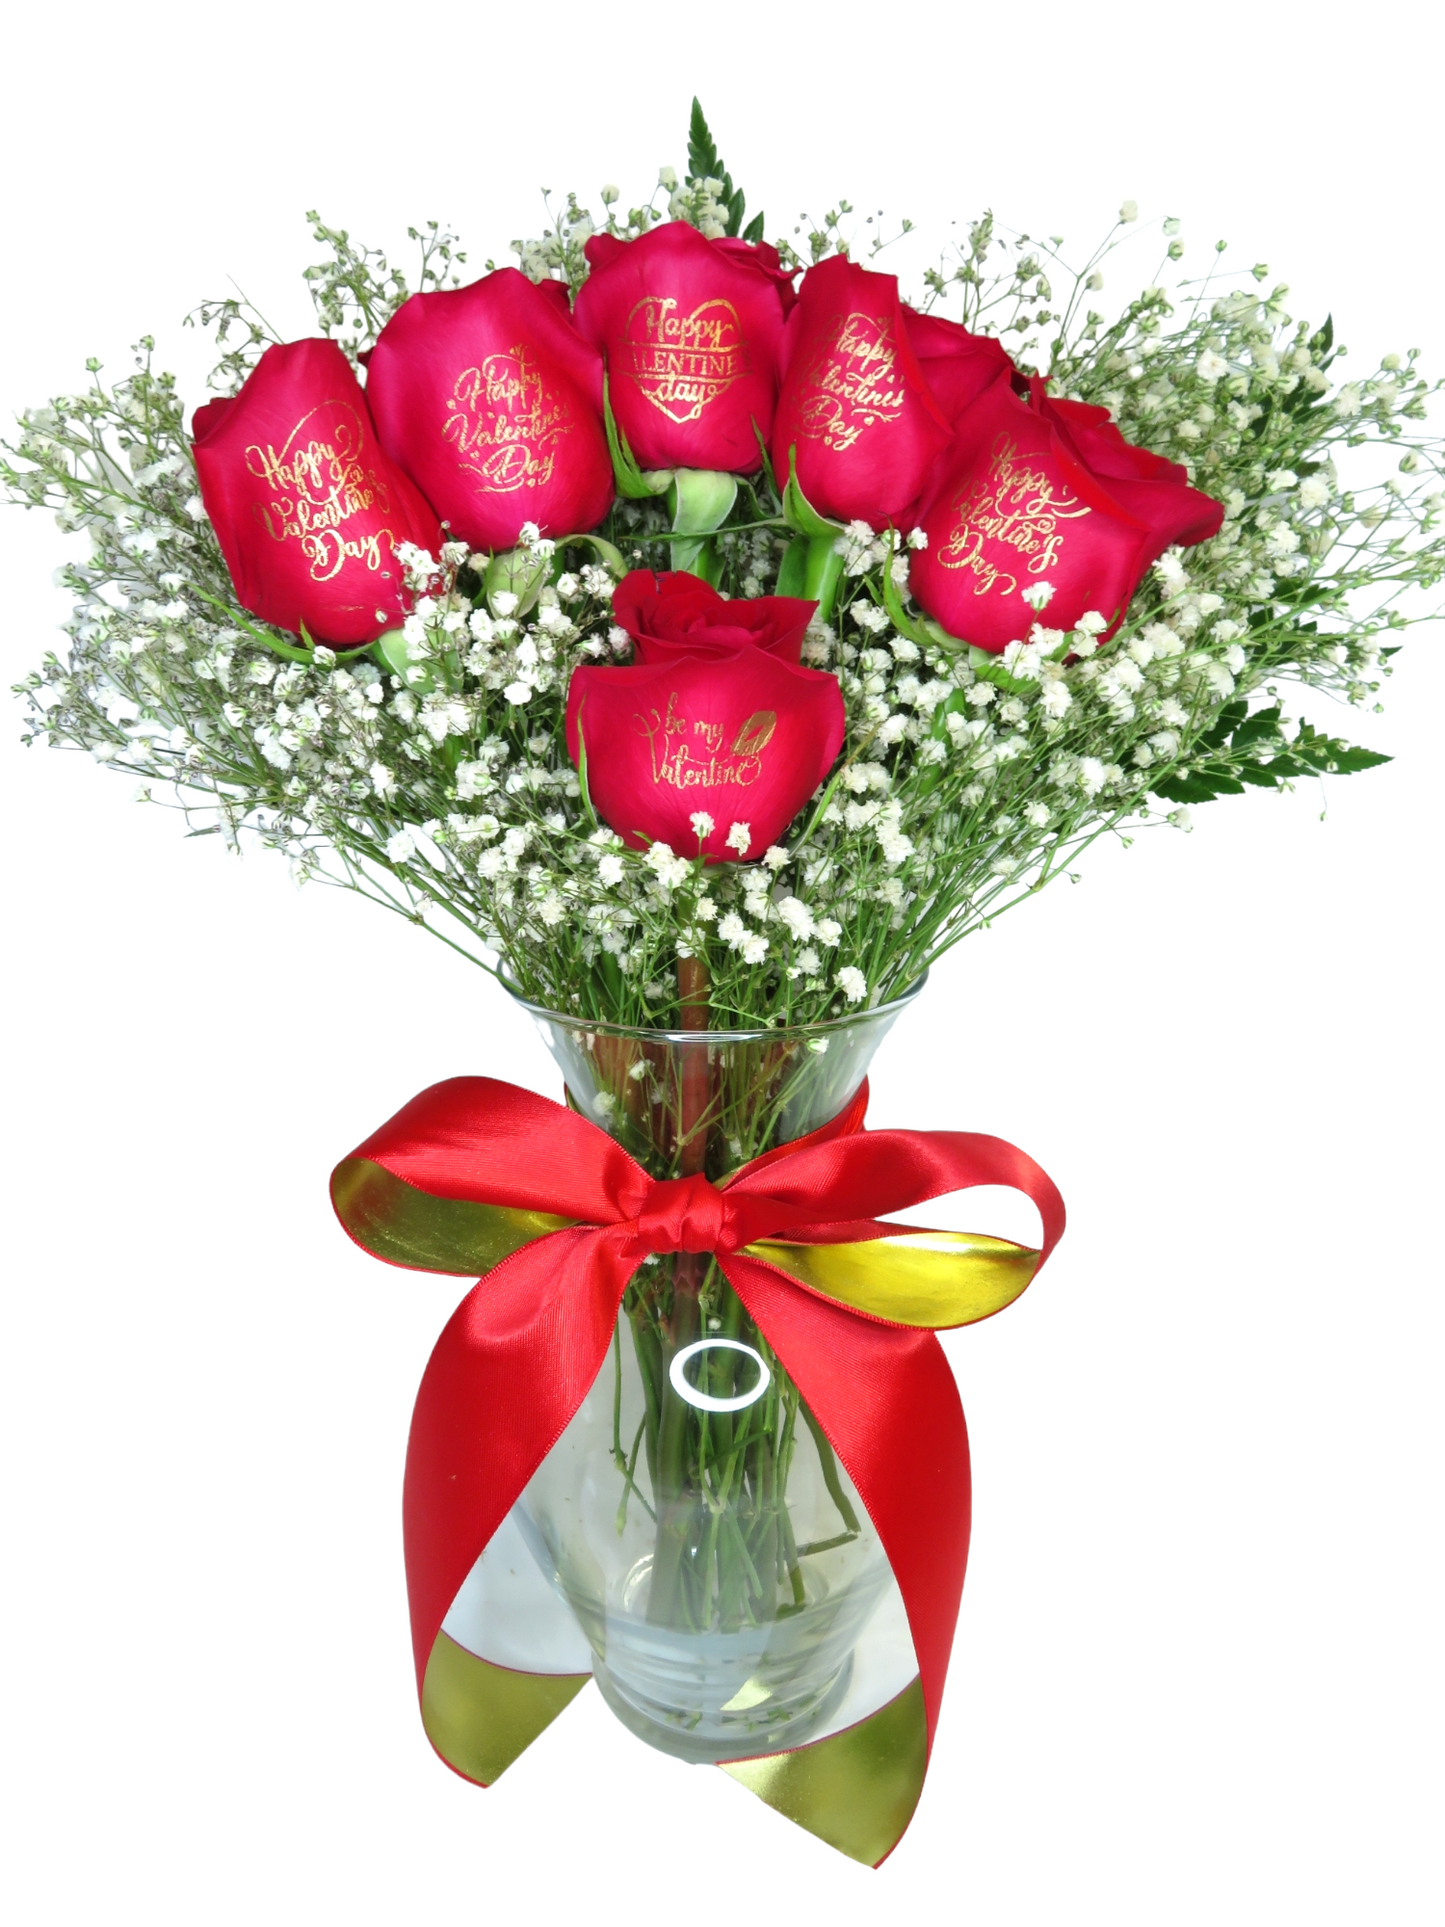 6 Red Roses with "Happy Valentine's Day - Be My Valentine" Designs